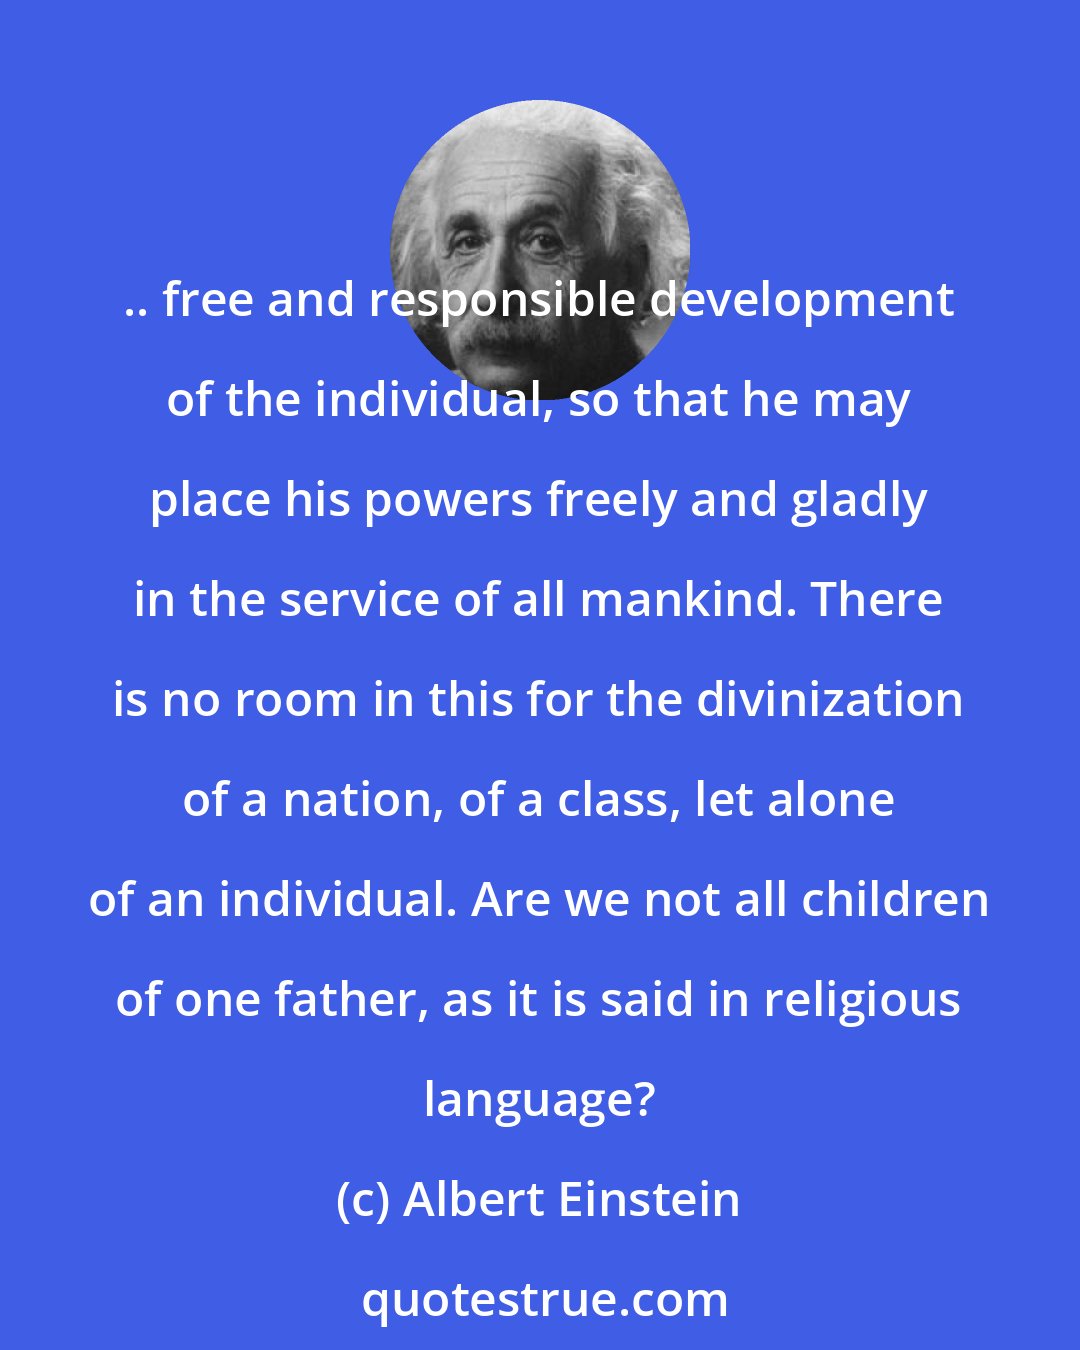 Albert Einstein: .. free and responsible development of the individual, so that he may place his powers freely and gladly in the service of all mankind. There is no room in this for the divinization of a nation, of a class, let alone of an individual. Are we not all children of one father, as it is said in religious language?